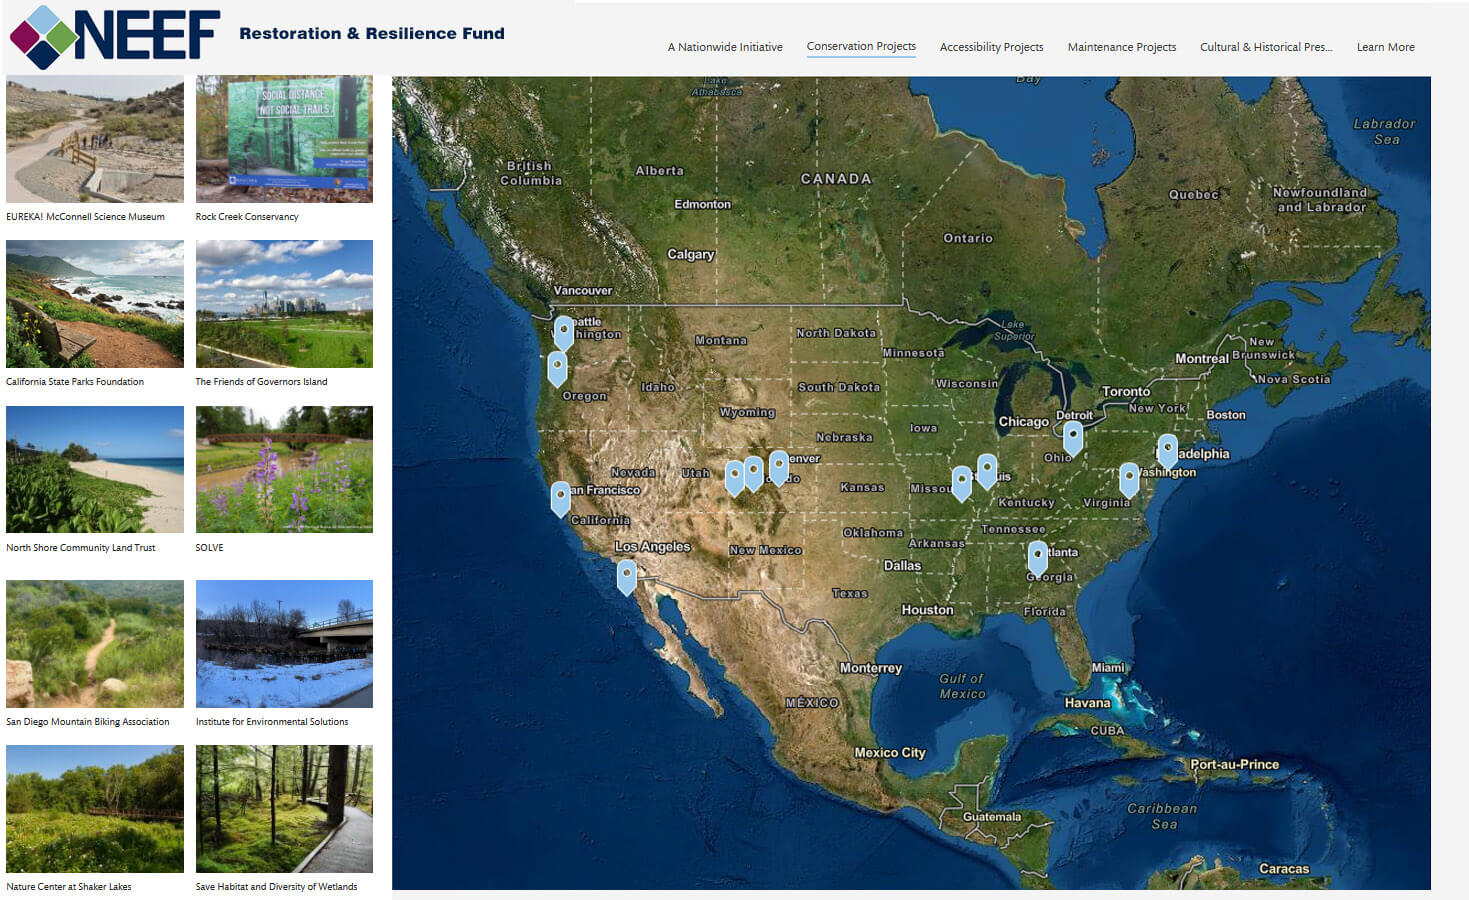 NEEF restoration and resilience grant fund story map